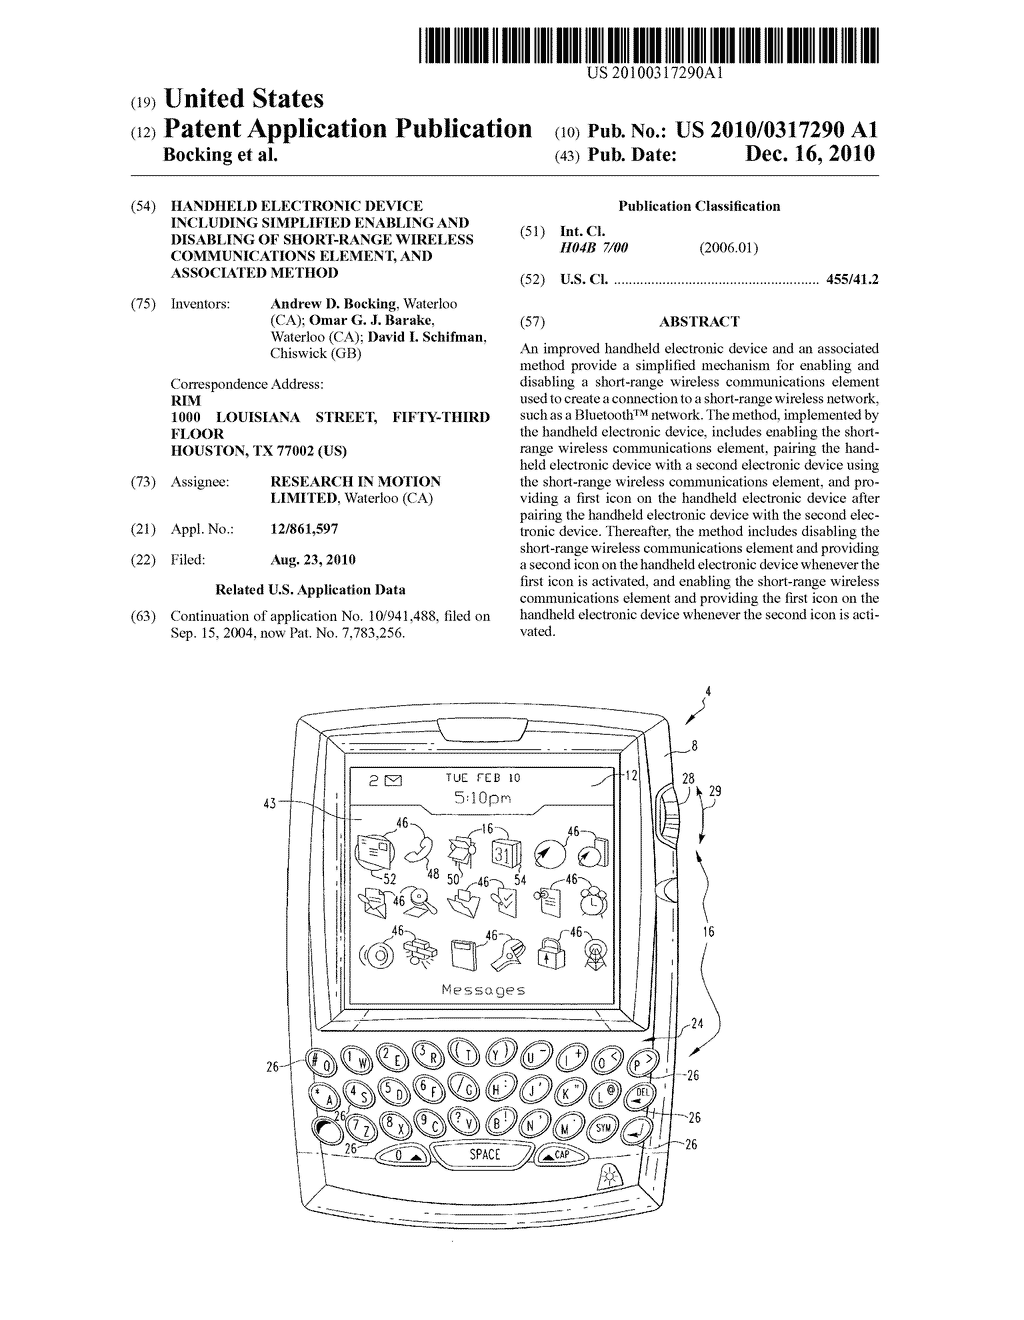 Handheld Electronic Device Including Simplified Enabling and Disabling of Short-Range Wireless Communications Element, and Associated Method - diagram, schematic, and image 01